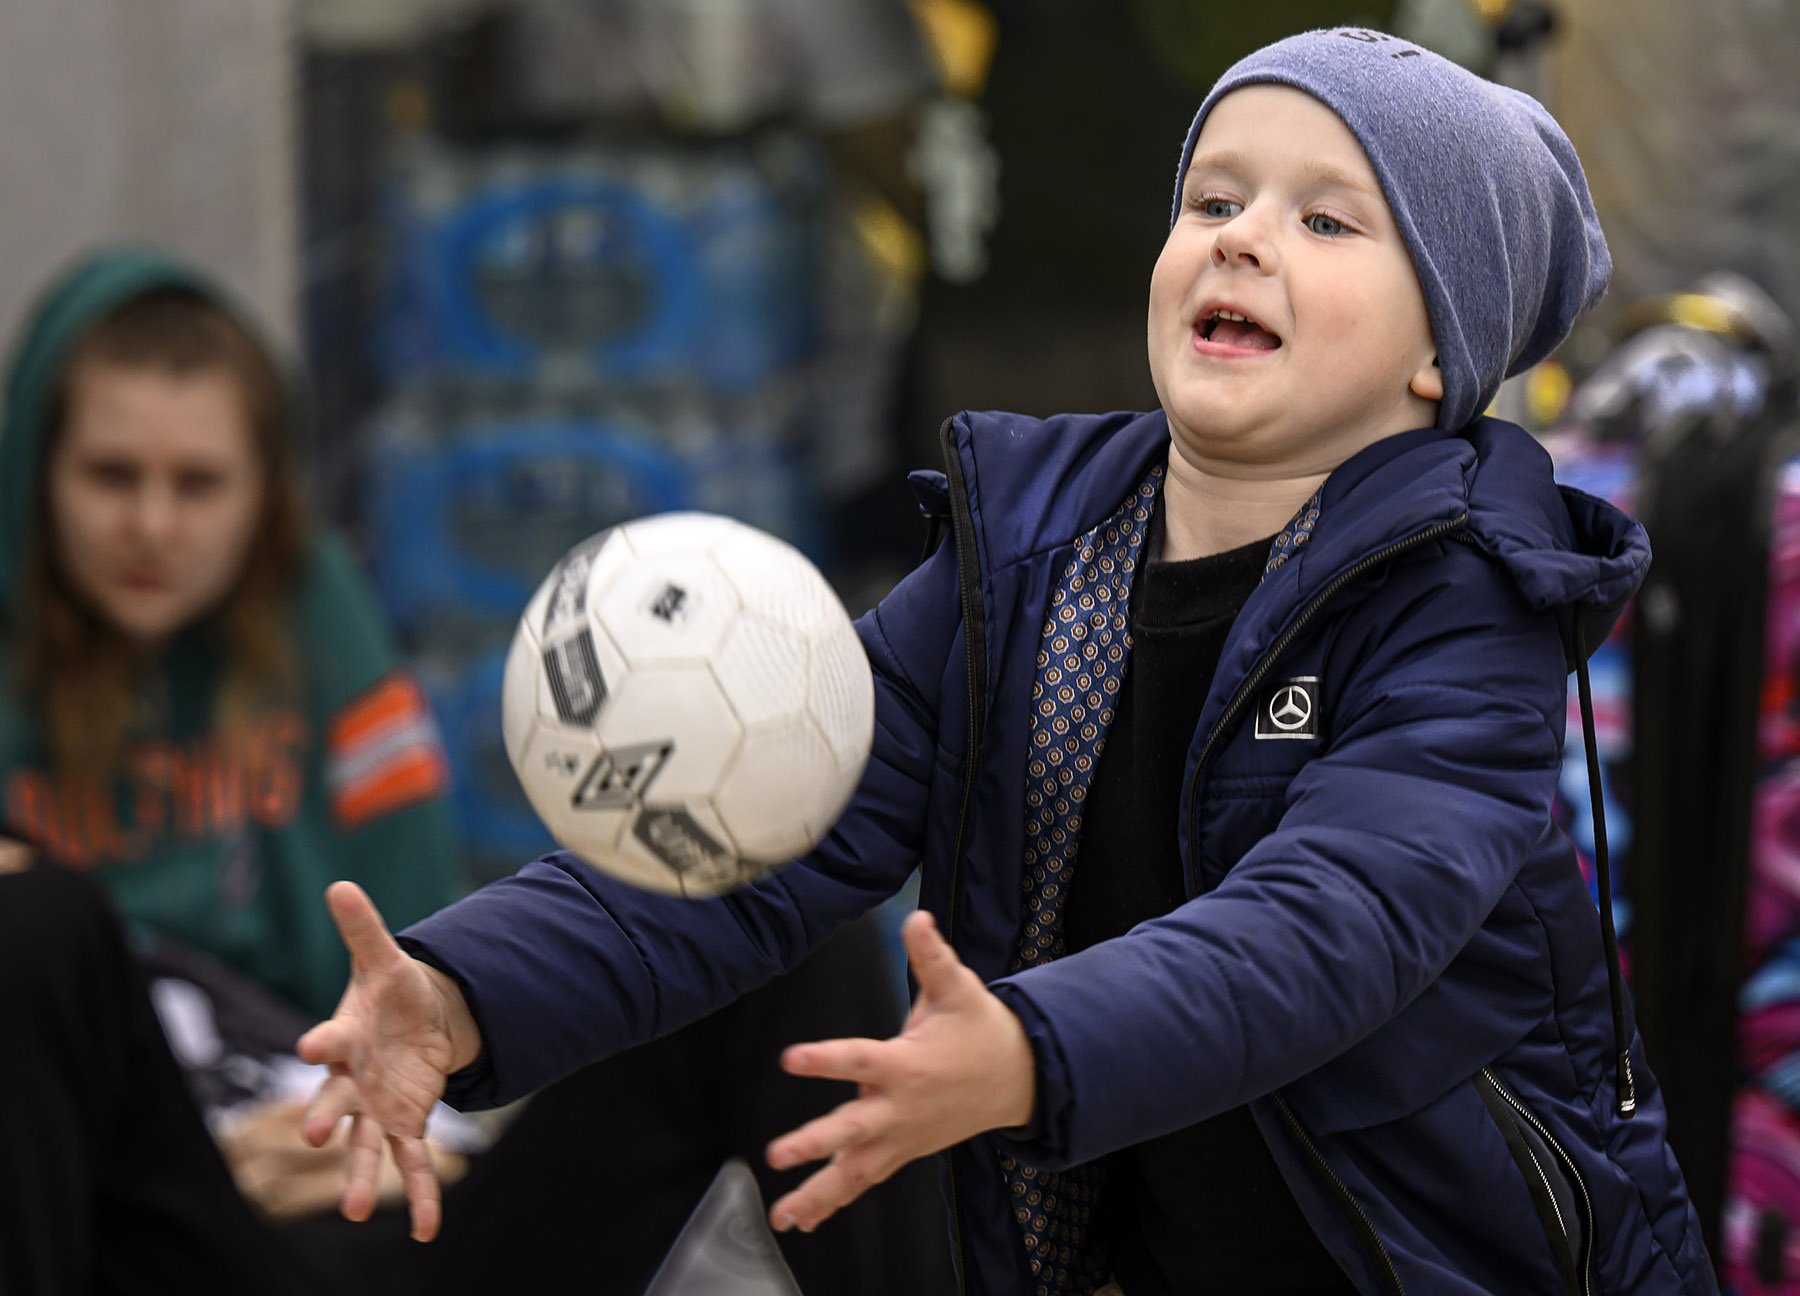  A Ukrainian boy plays catch with his mother while awaiting entry into the U.S. as asylum seekers on Wednesday, March 30, 2022. 